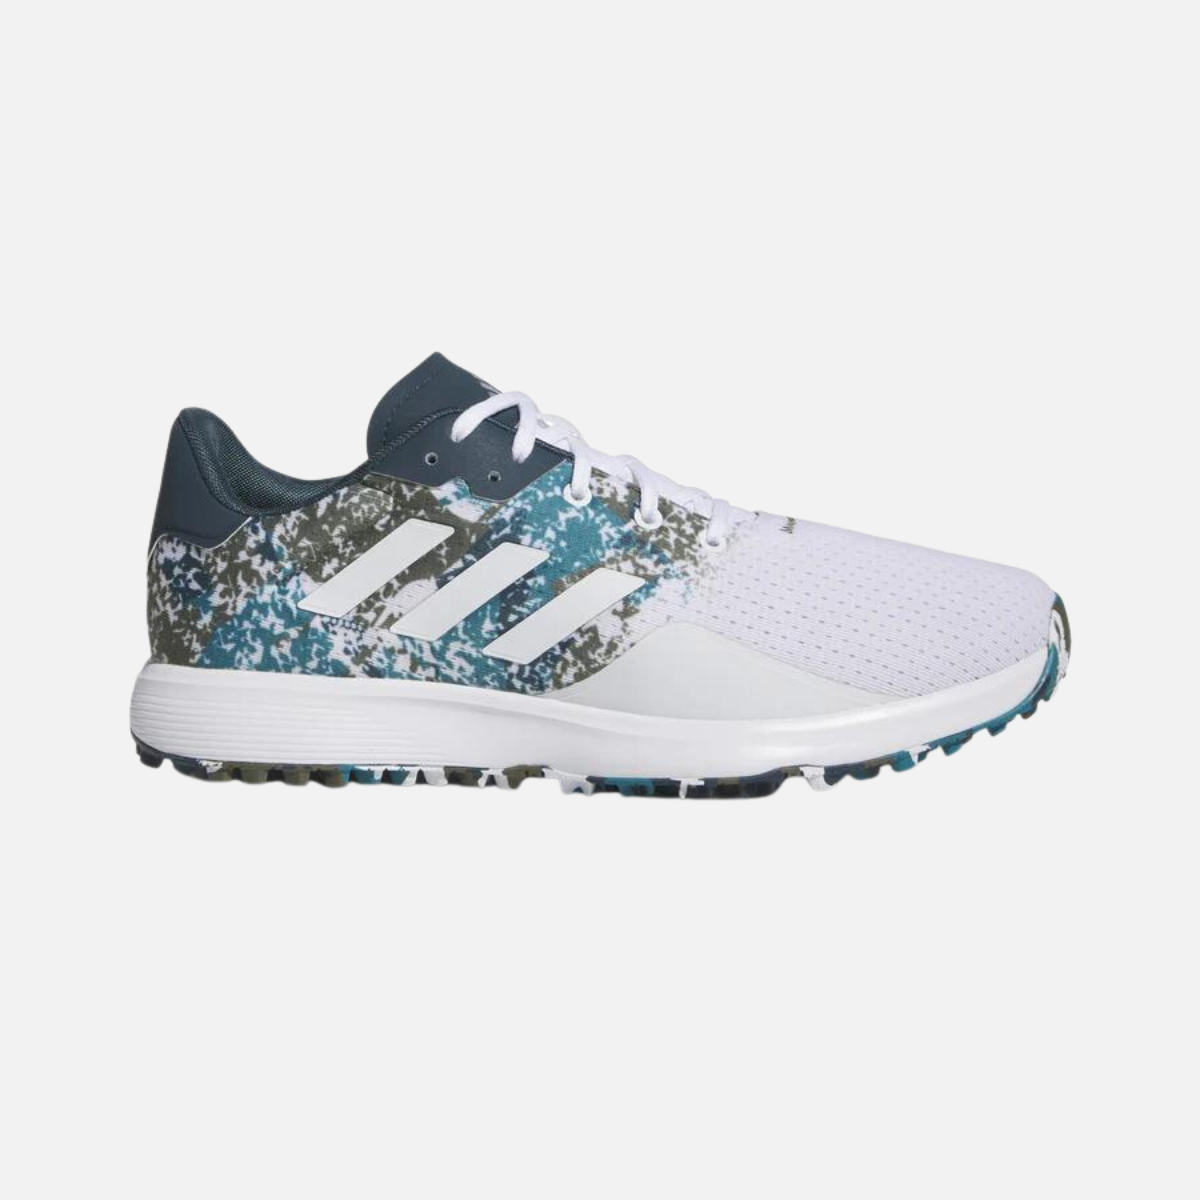 Adidas S2G SL 23 Golf Shoes -White/Silver/Arctic Night